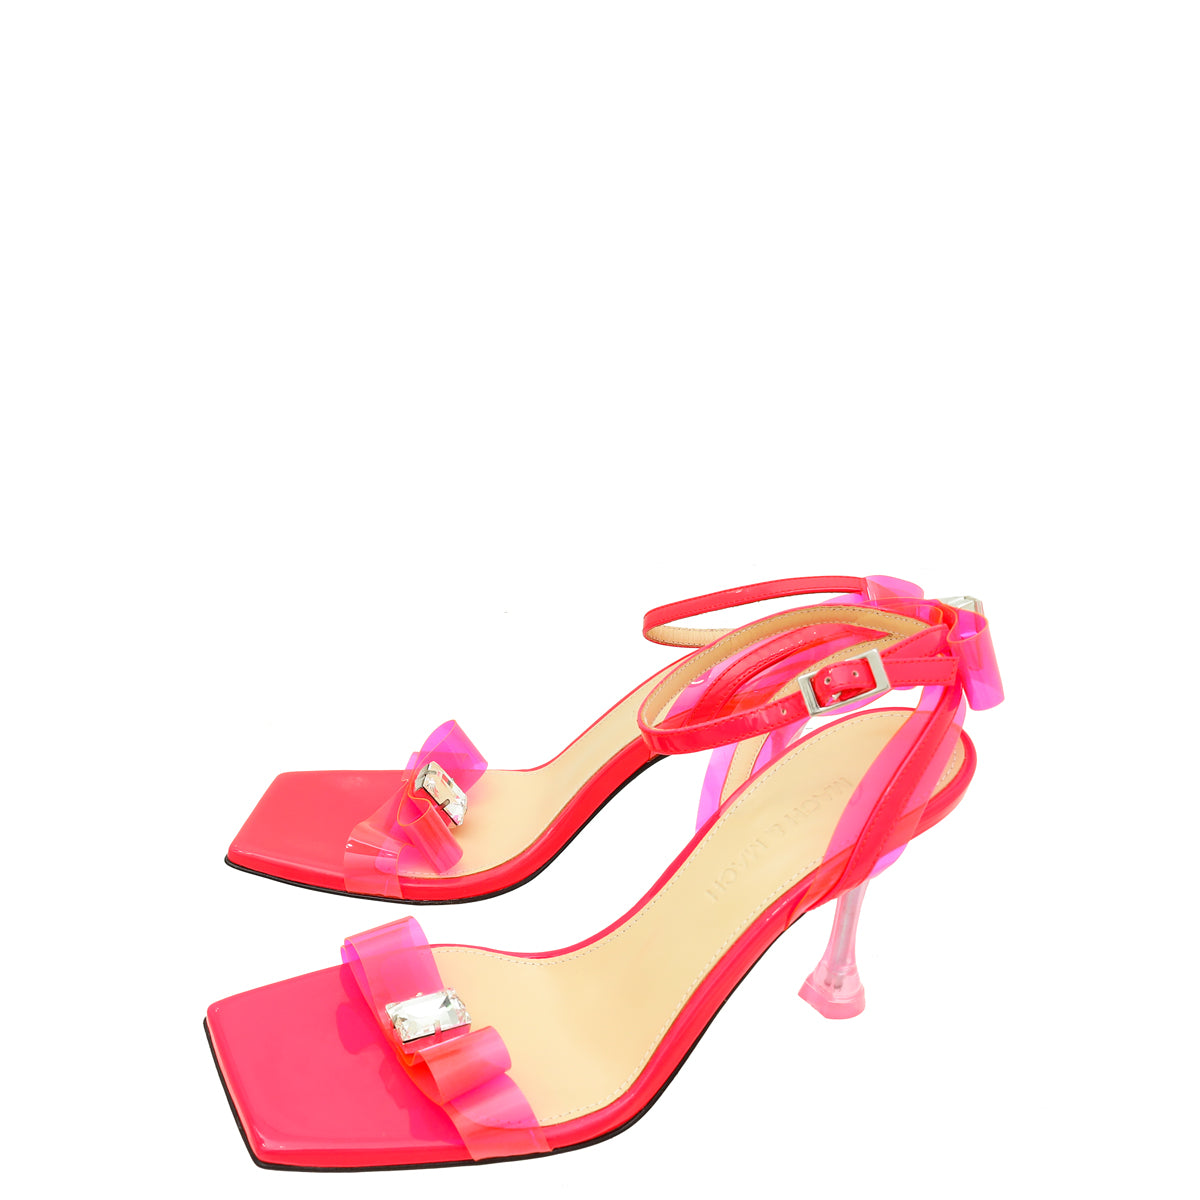 Mach & Mach Neon Pink French Bow Square Toe Sandal 36.5